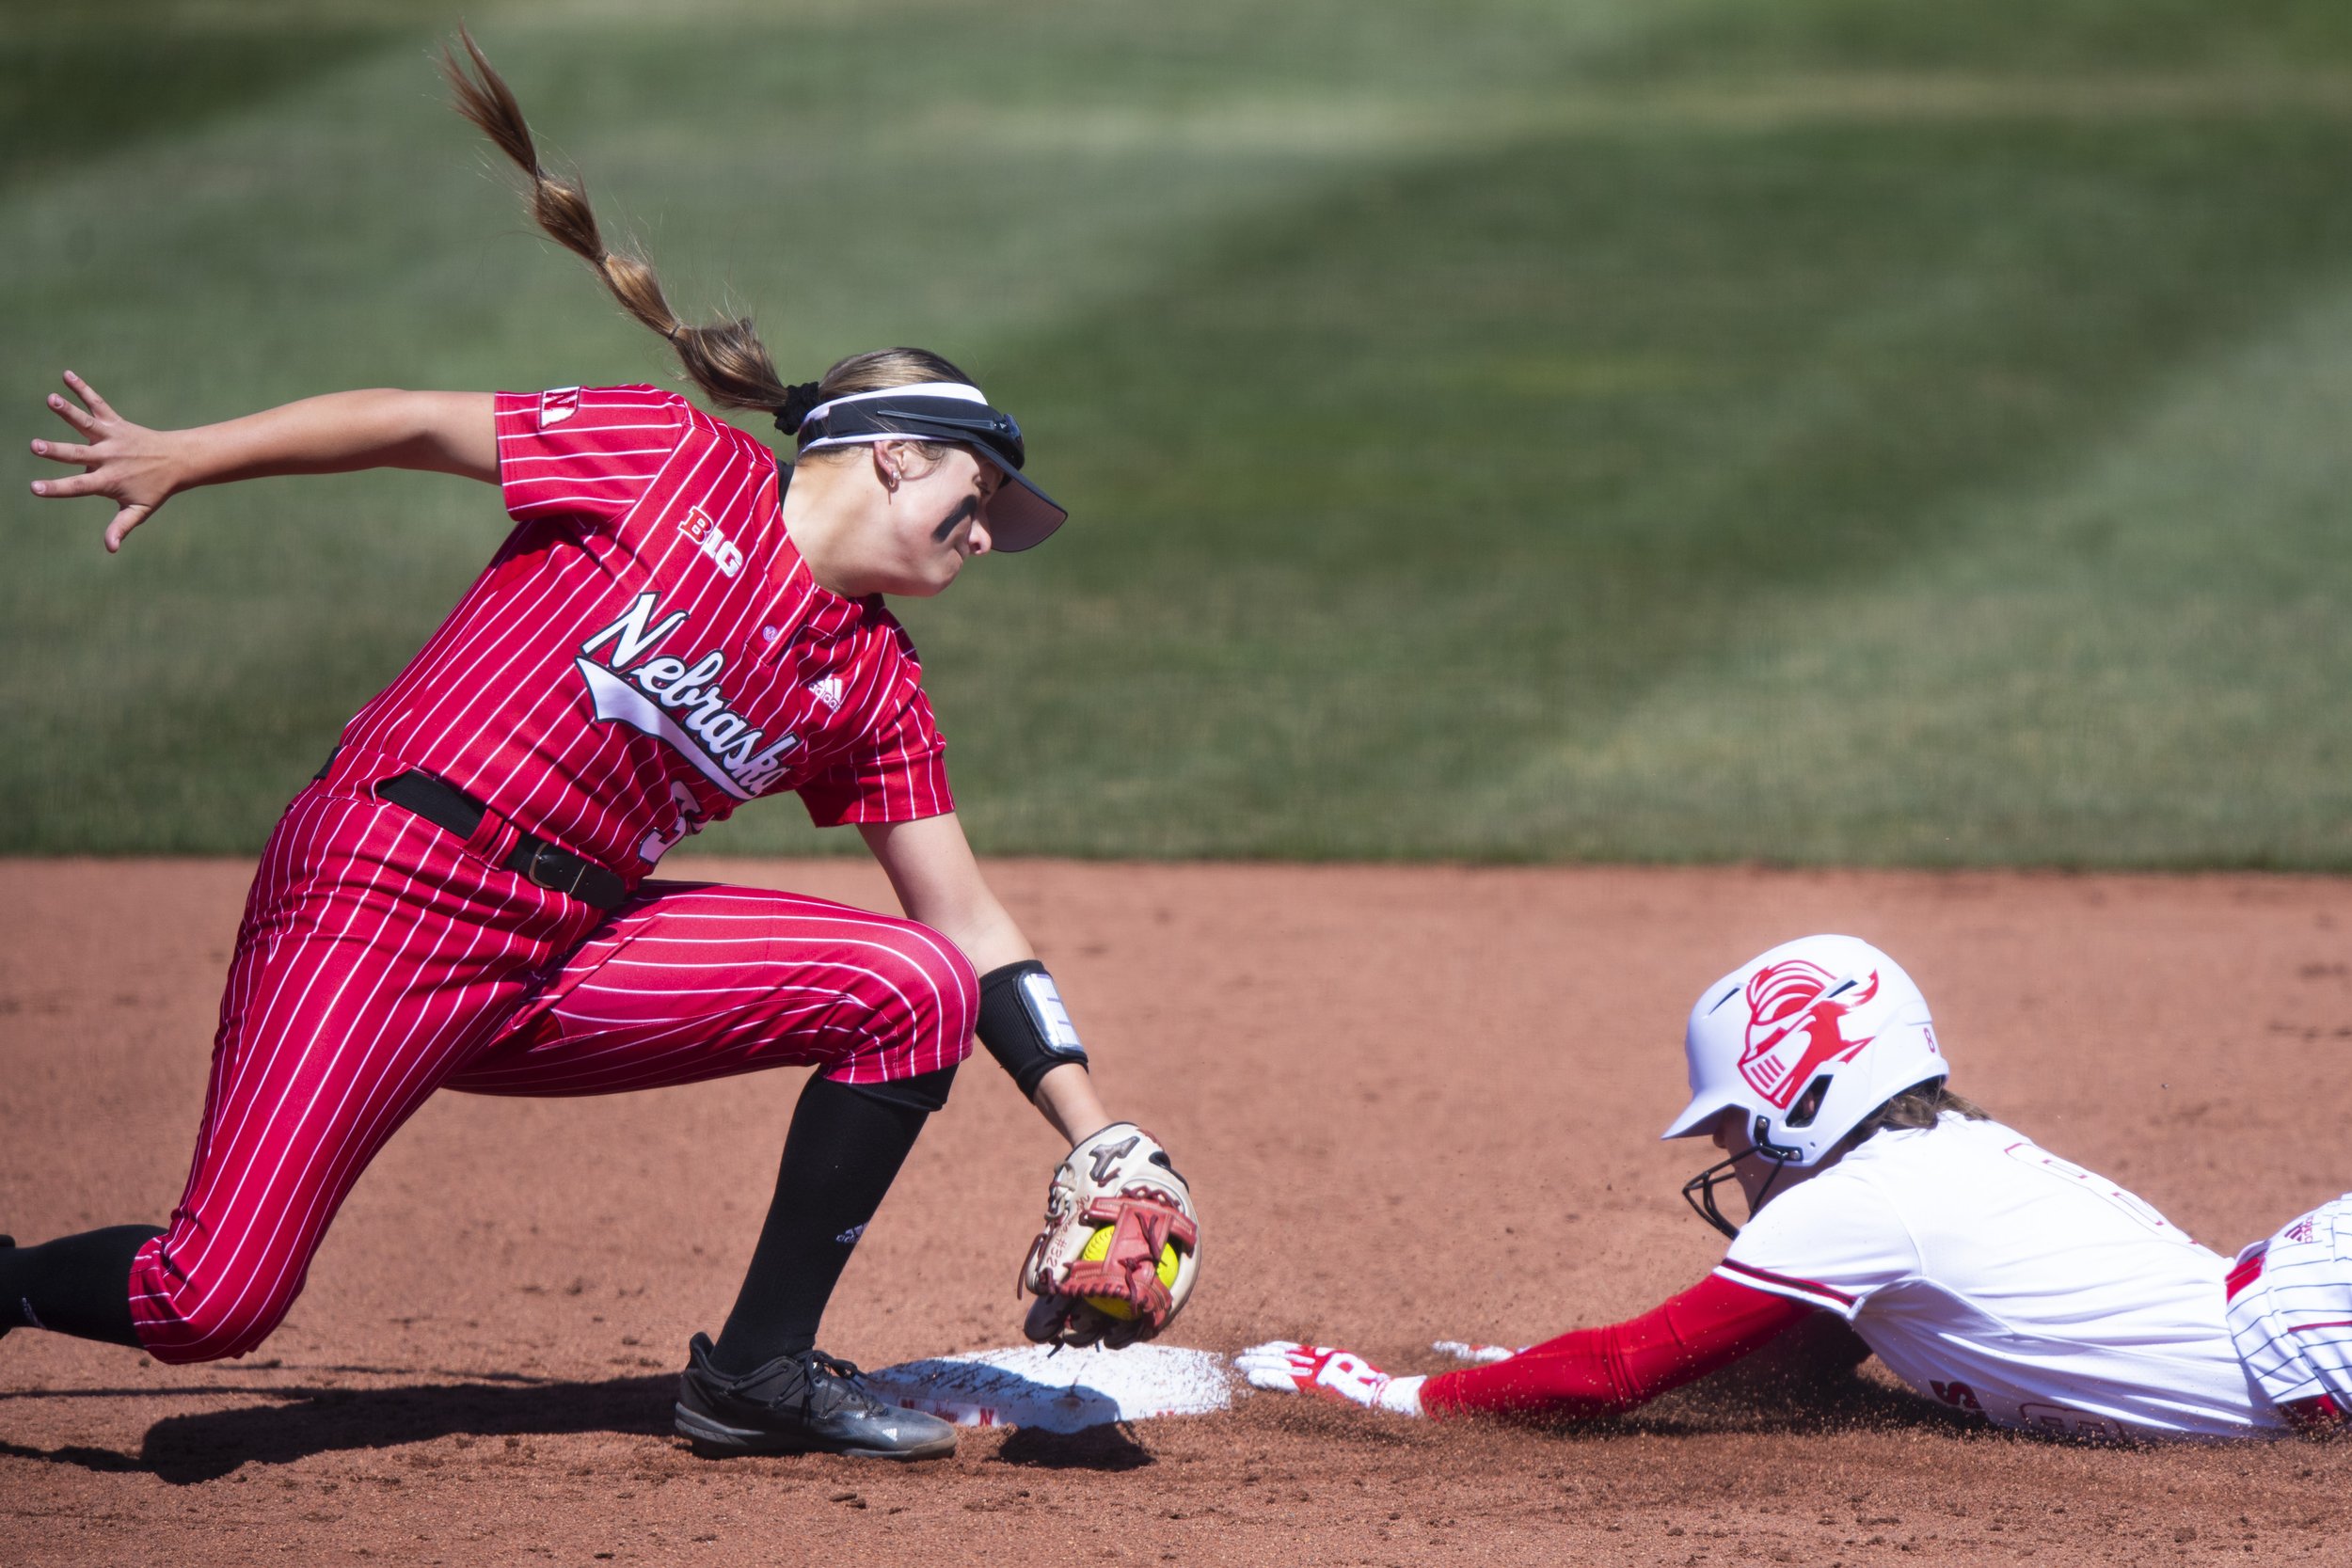  Nebraska second basemen Cam Ybarra  (left) tries but fails to make the tag on Rutgers baserunner Taylor Fawcett during an attempt to steal second base during the second inning at Bowlin Stadium on April 2, 2022, in Lincoln, Nebraska.  